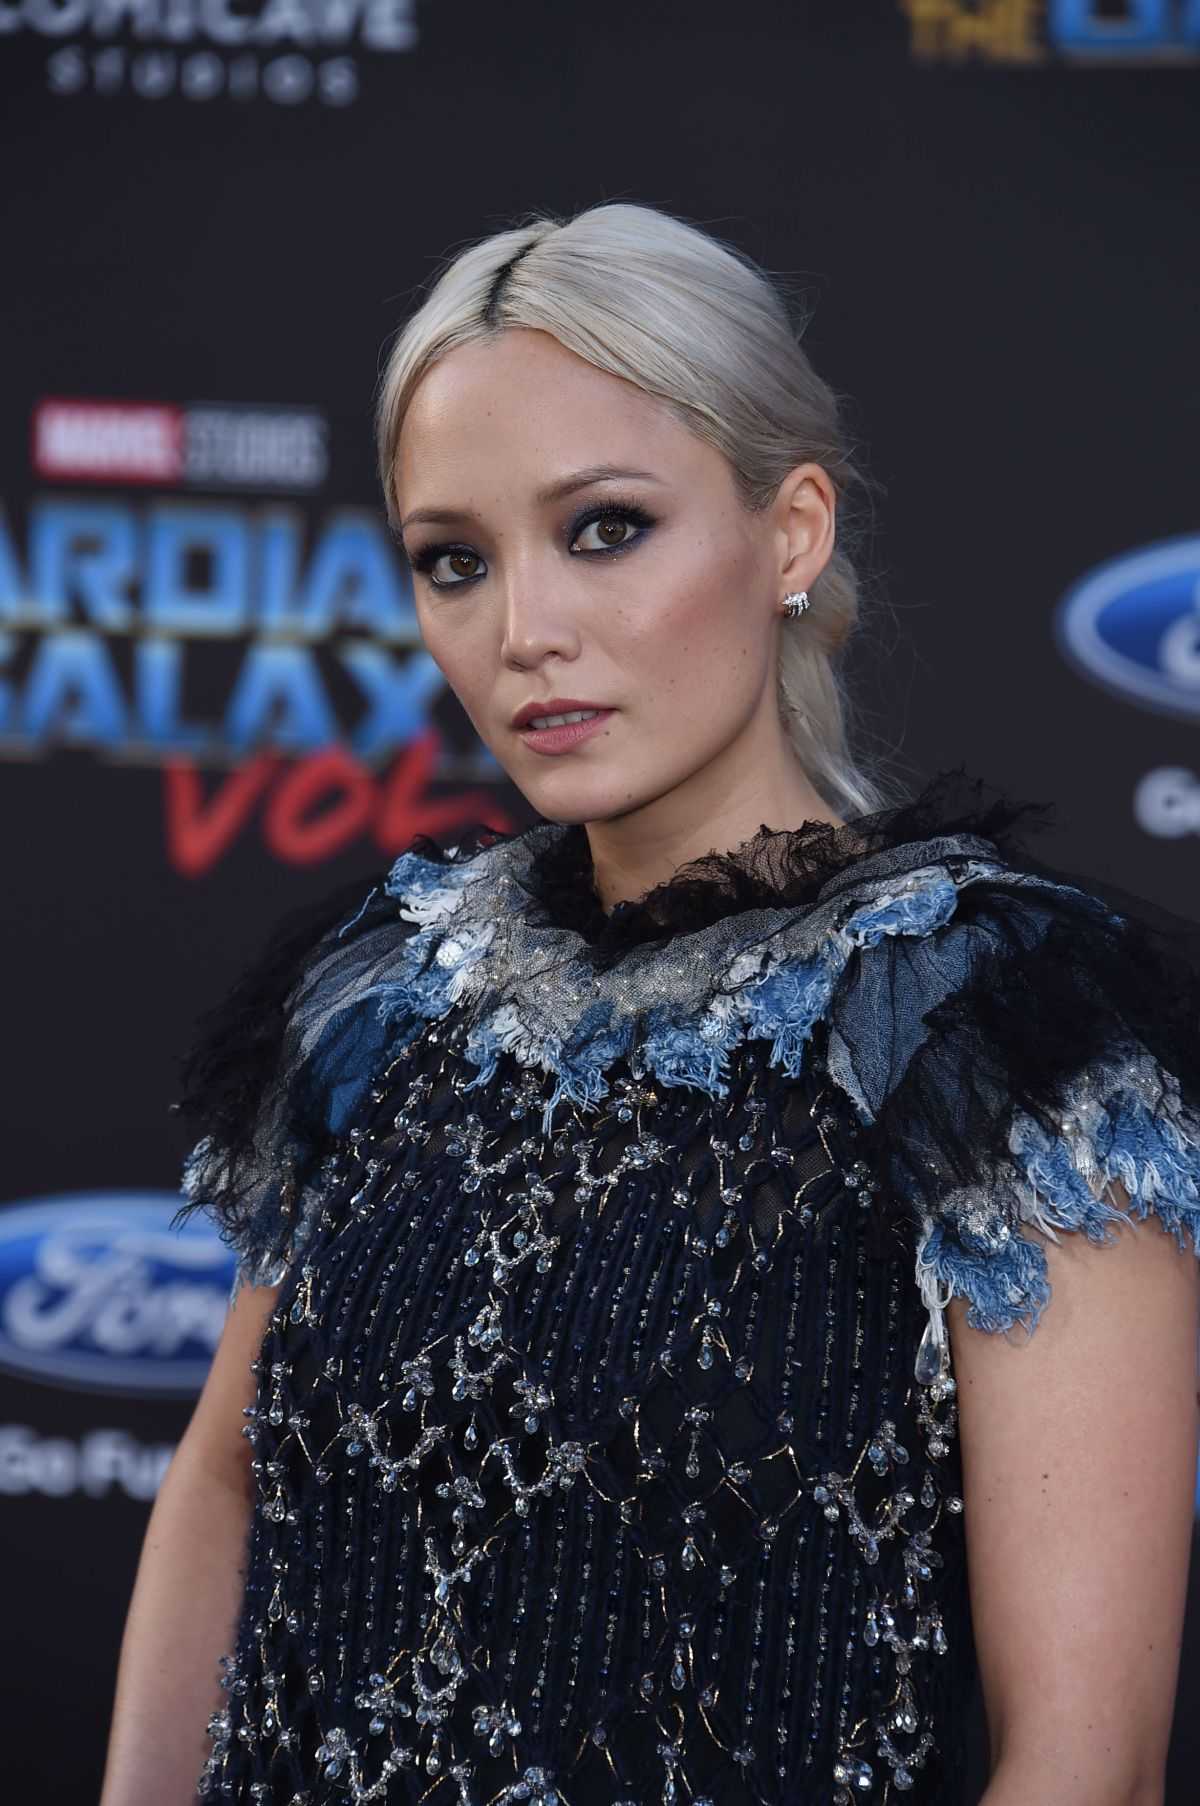 70+ Hot Pictures Of Pom Klementieff Who Plays Mantis In Marvel Cinematic Universe 238